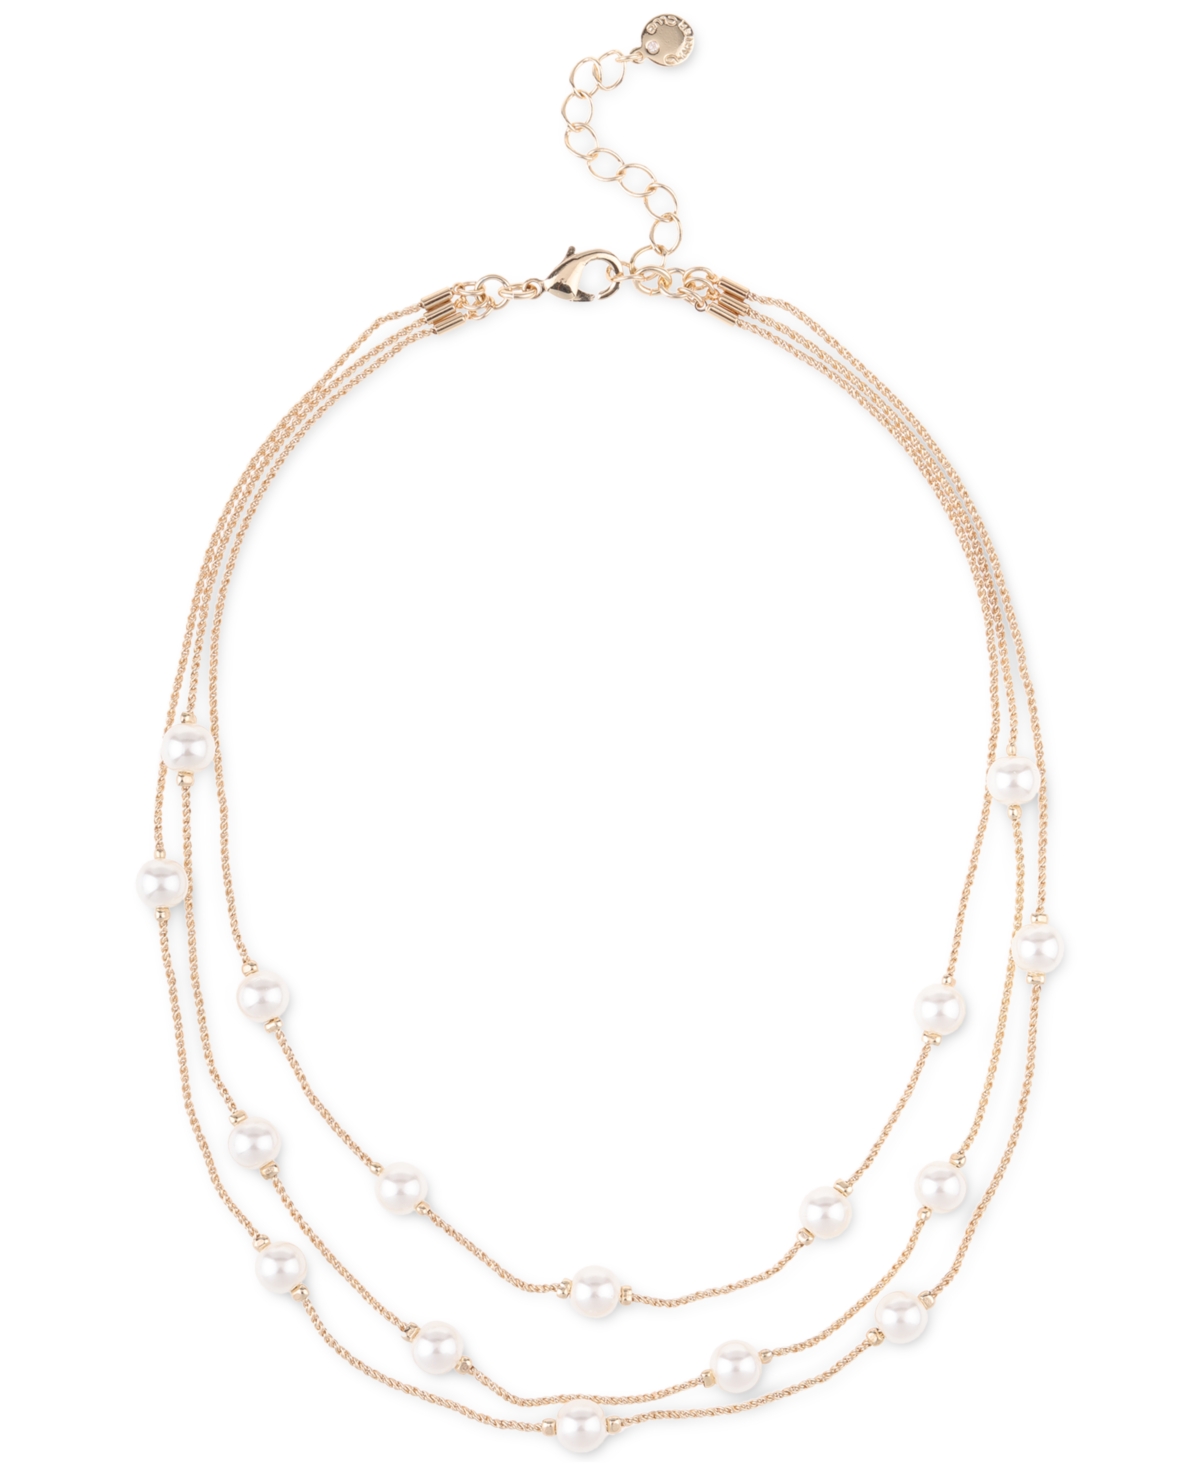 Imitation Pearl Layered Necklace, 16" + 2" extender, Created for Macy's - White